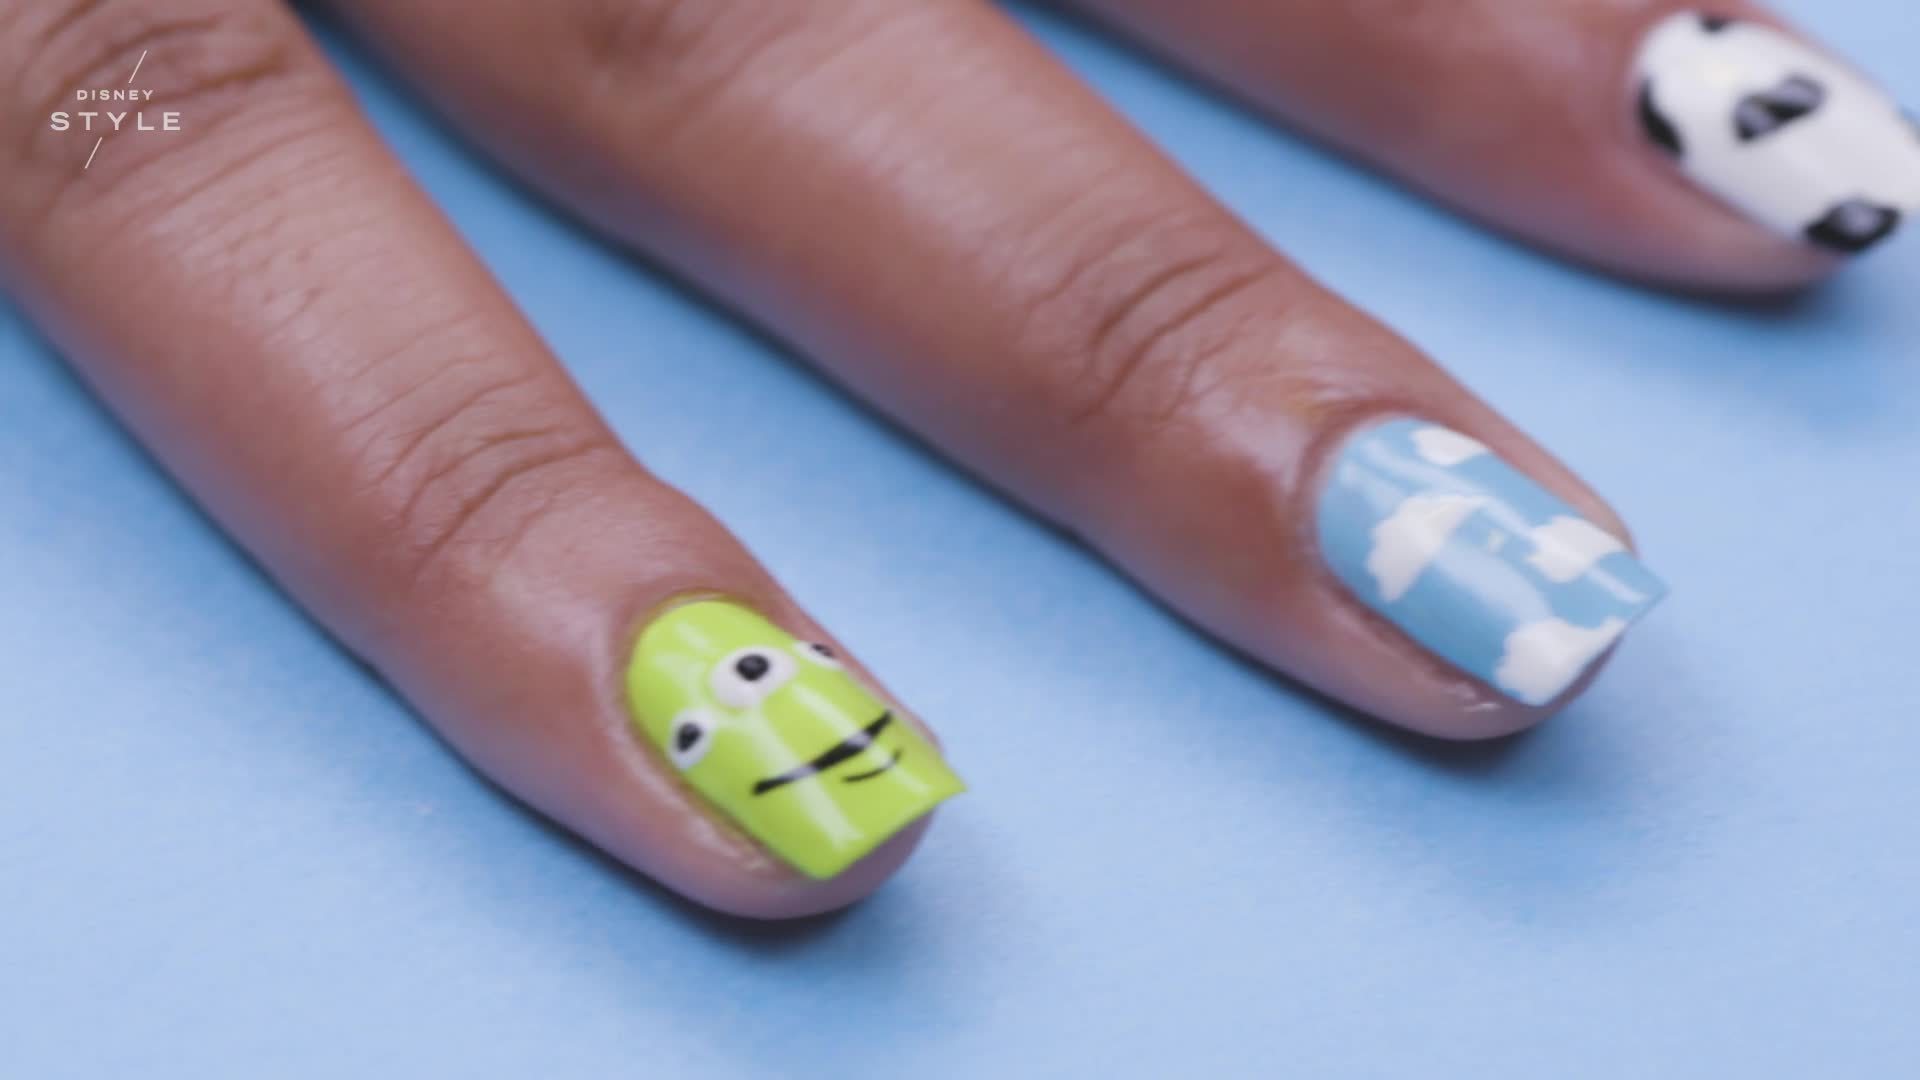 Toy Story Nail Art | TIPS by Disney Style